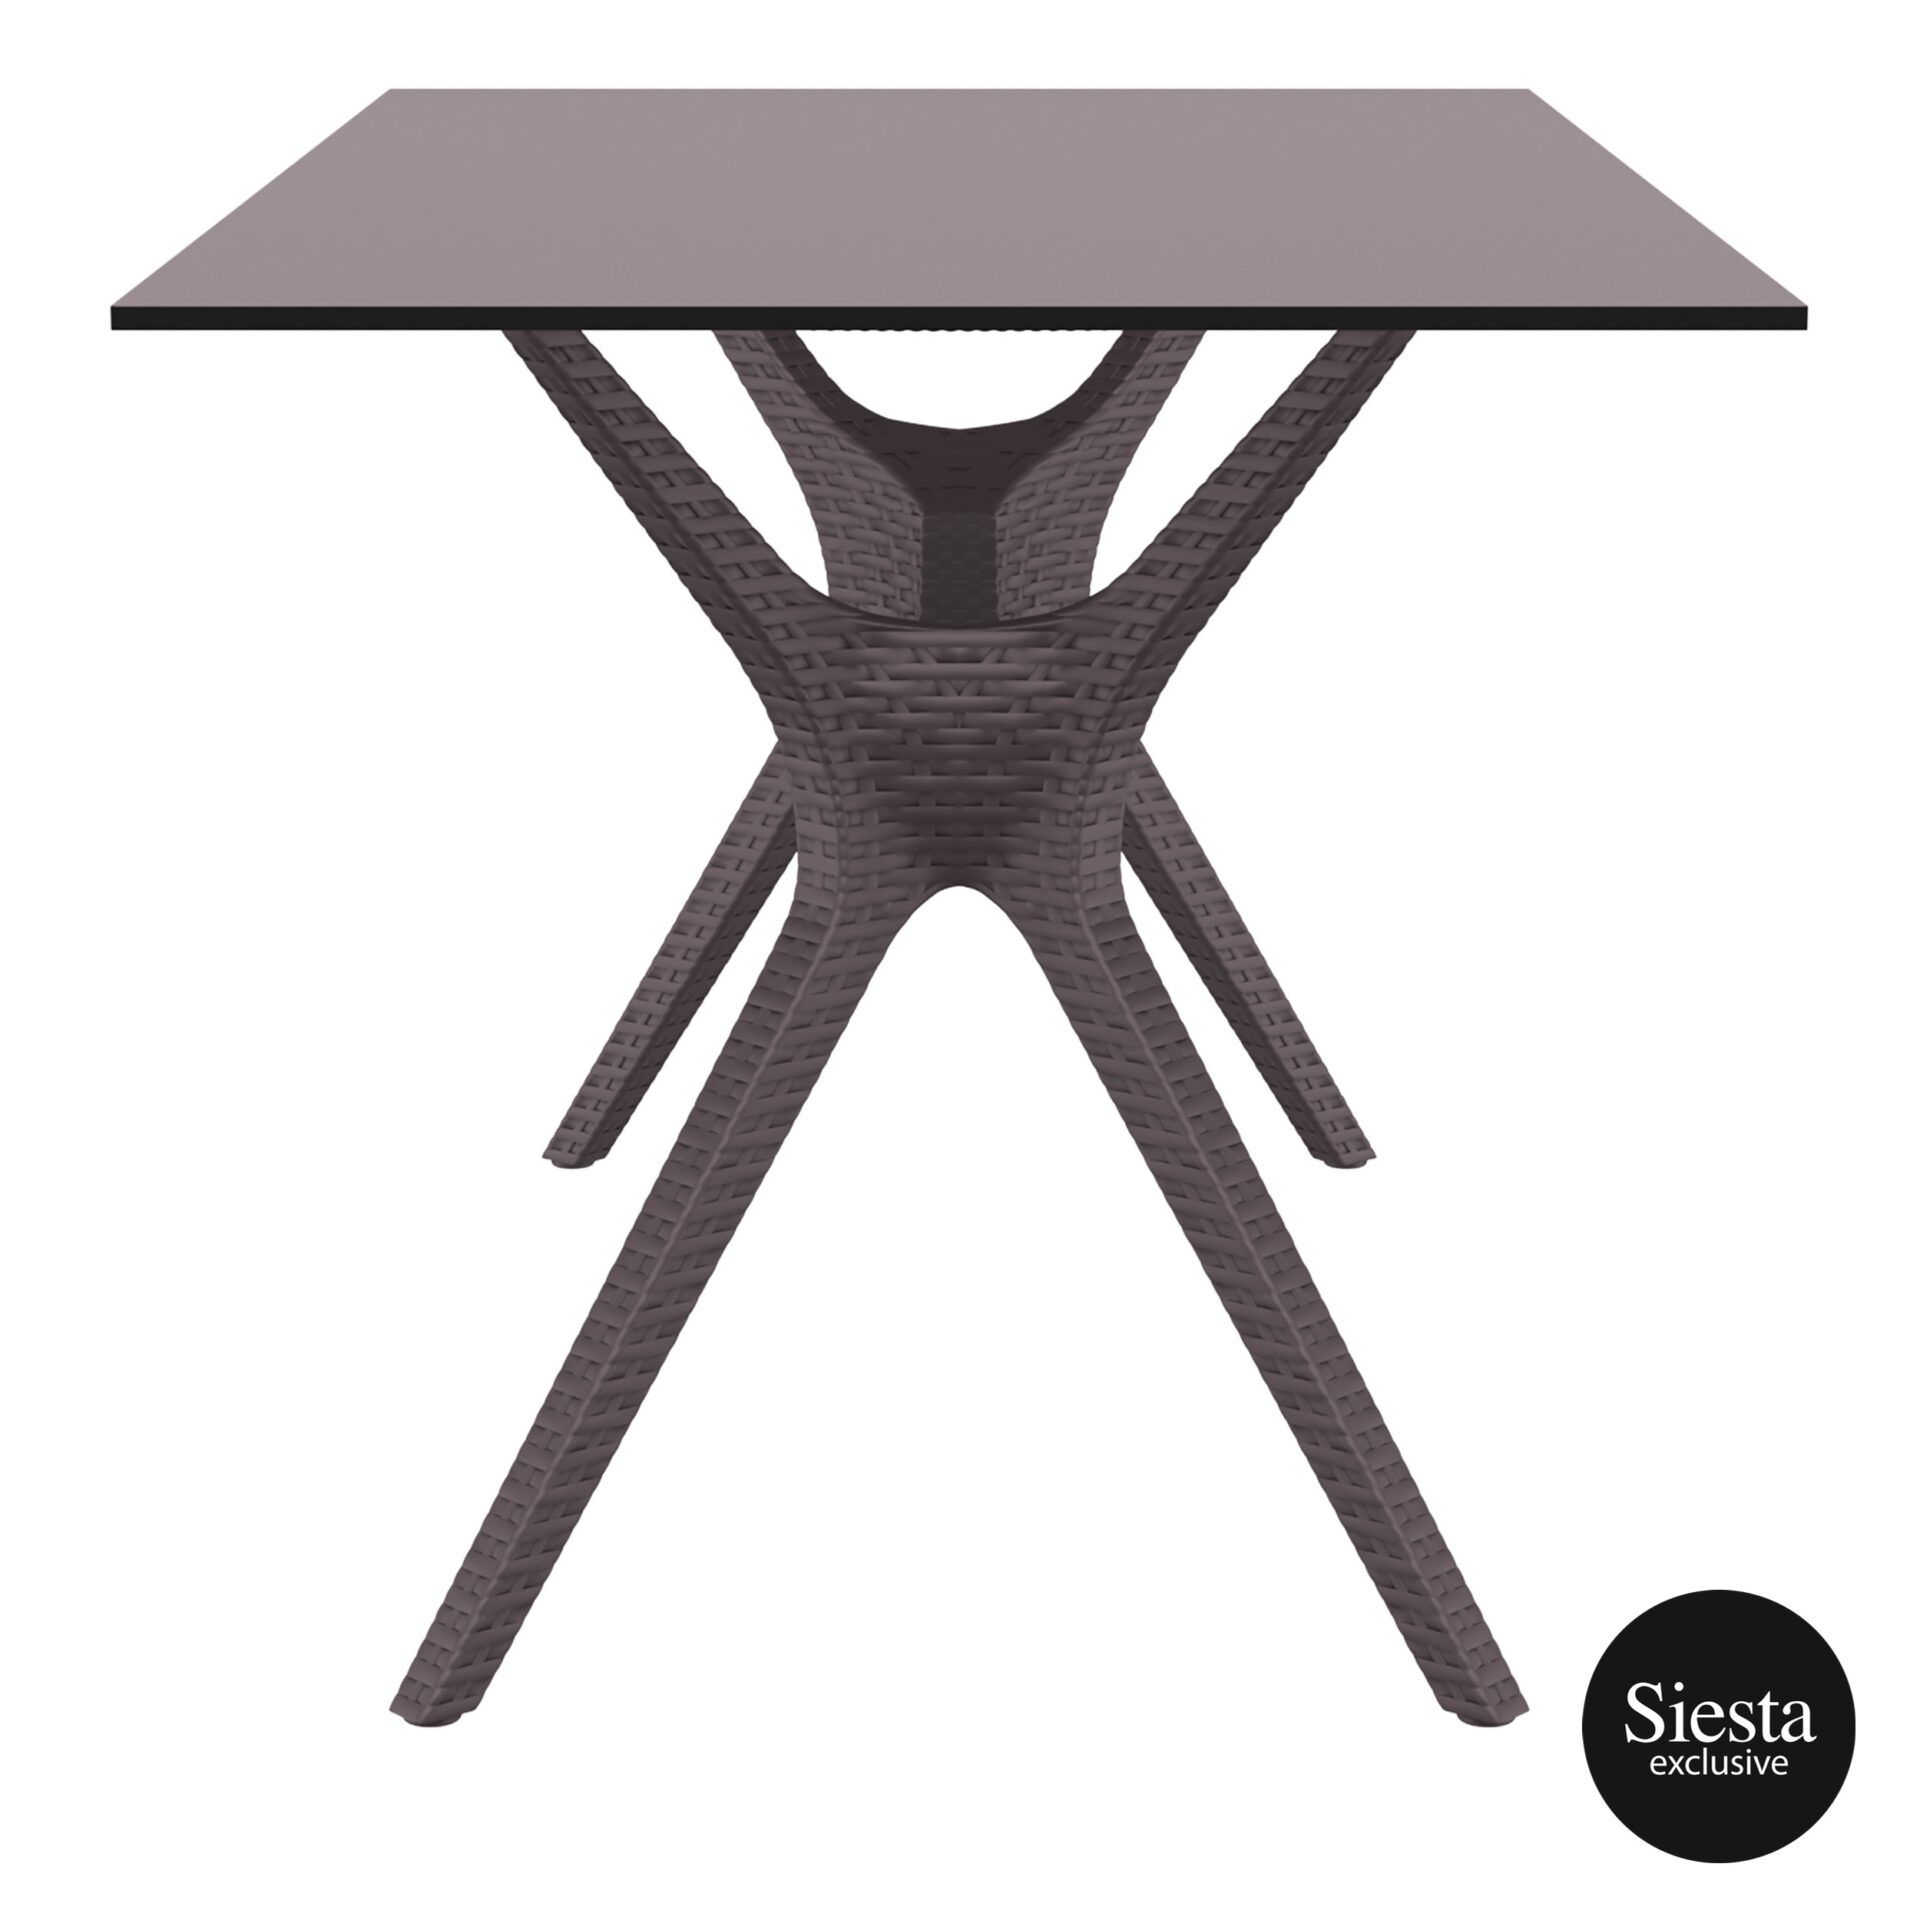 Buy FL Ibiza Hospitality Outdoor Dining Table Online | Office Better